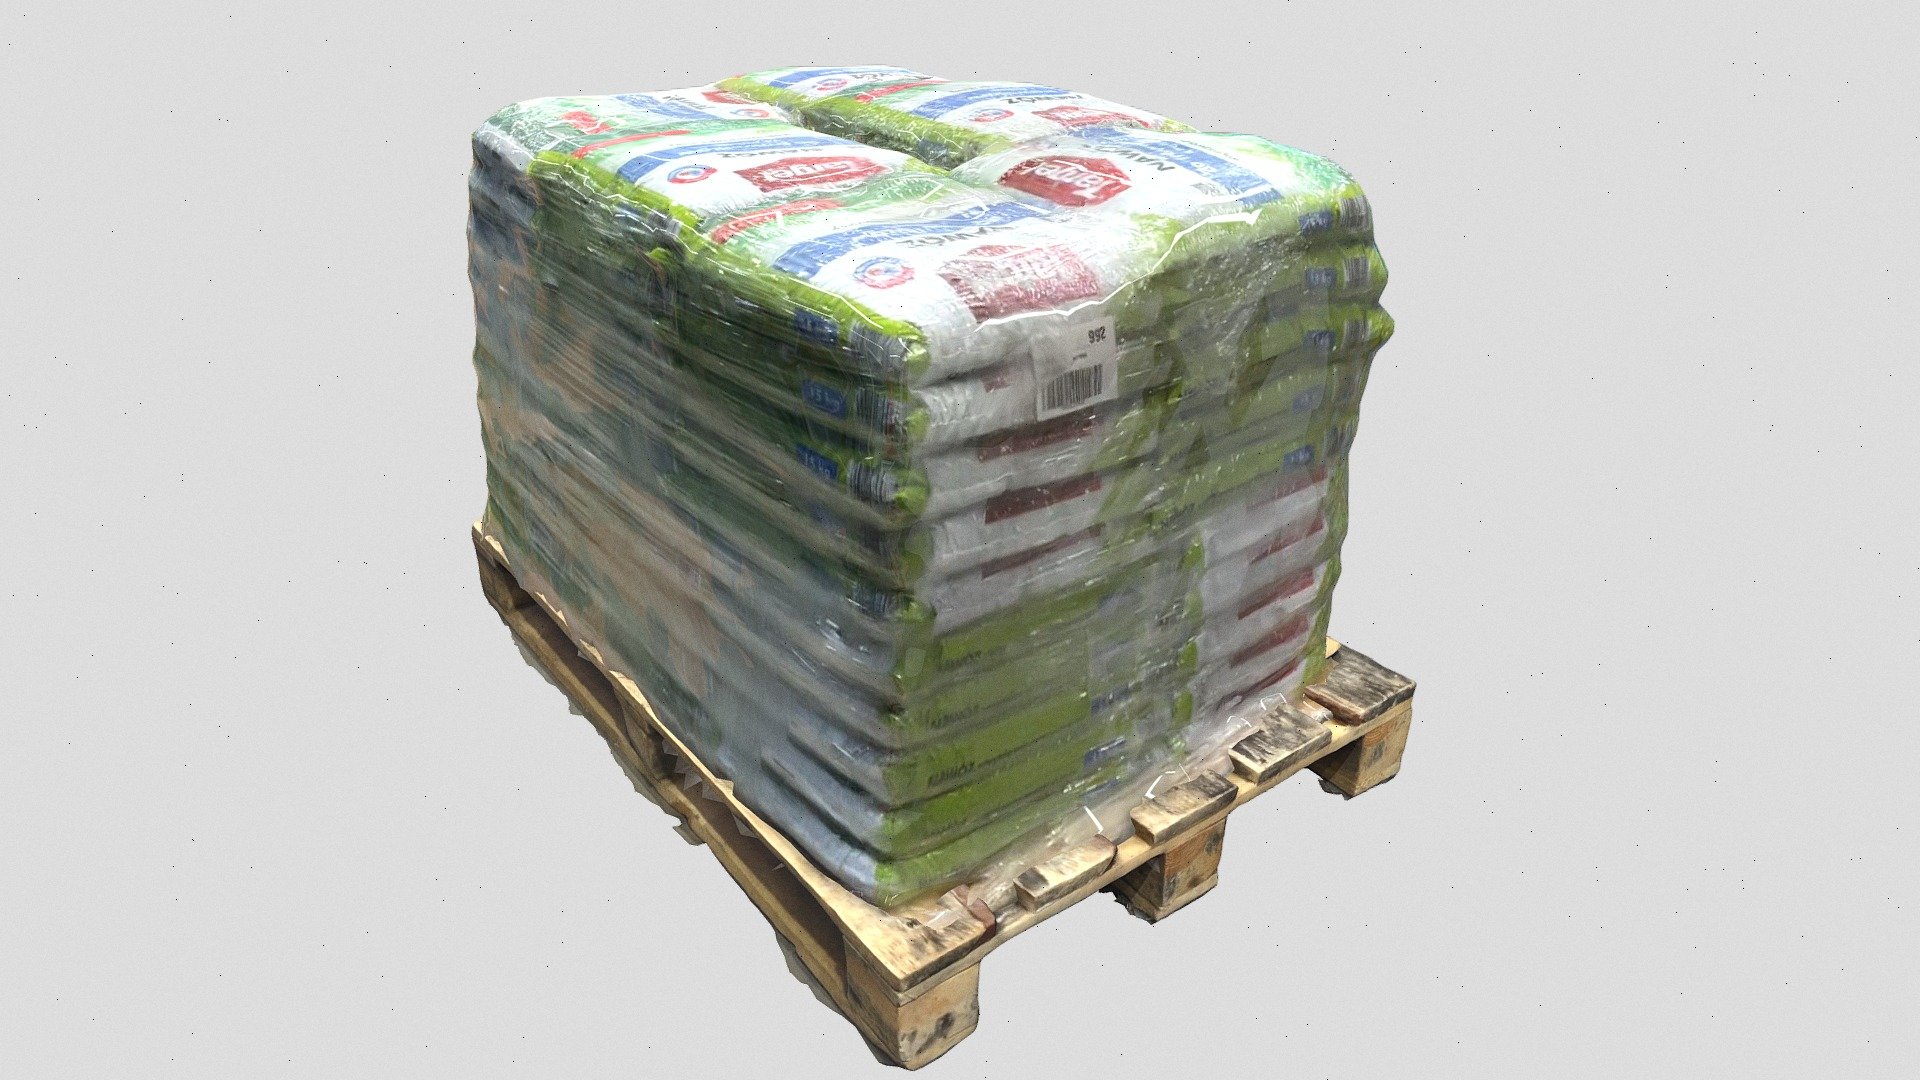 3D Scan of 10kg Fertilizer bags. The pallet is pretty messy, i know. Sorry :/ I'll update it whenever I'll make a better pallet model 3d model